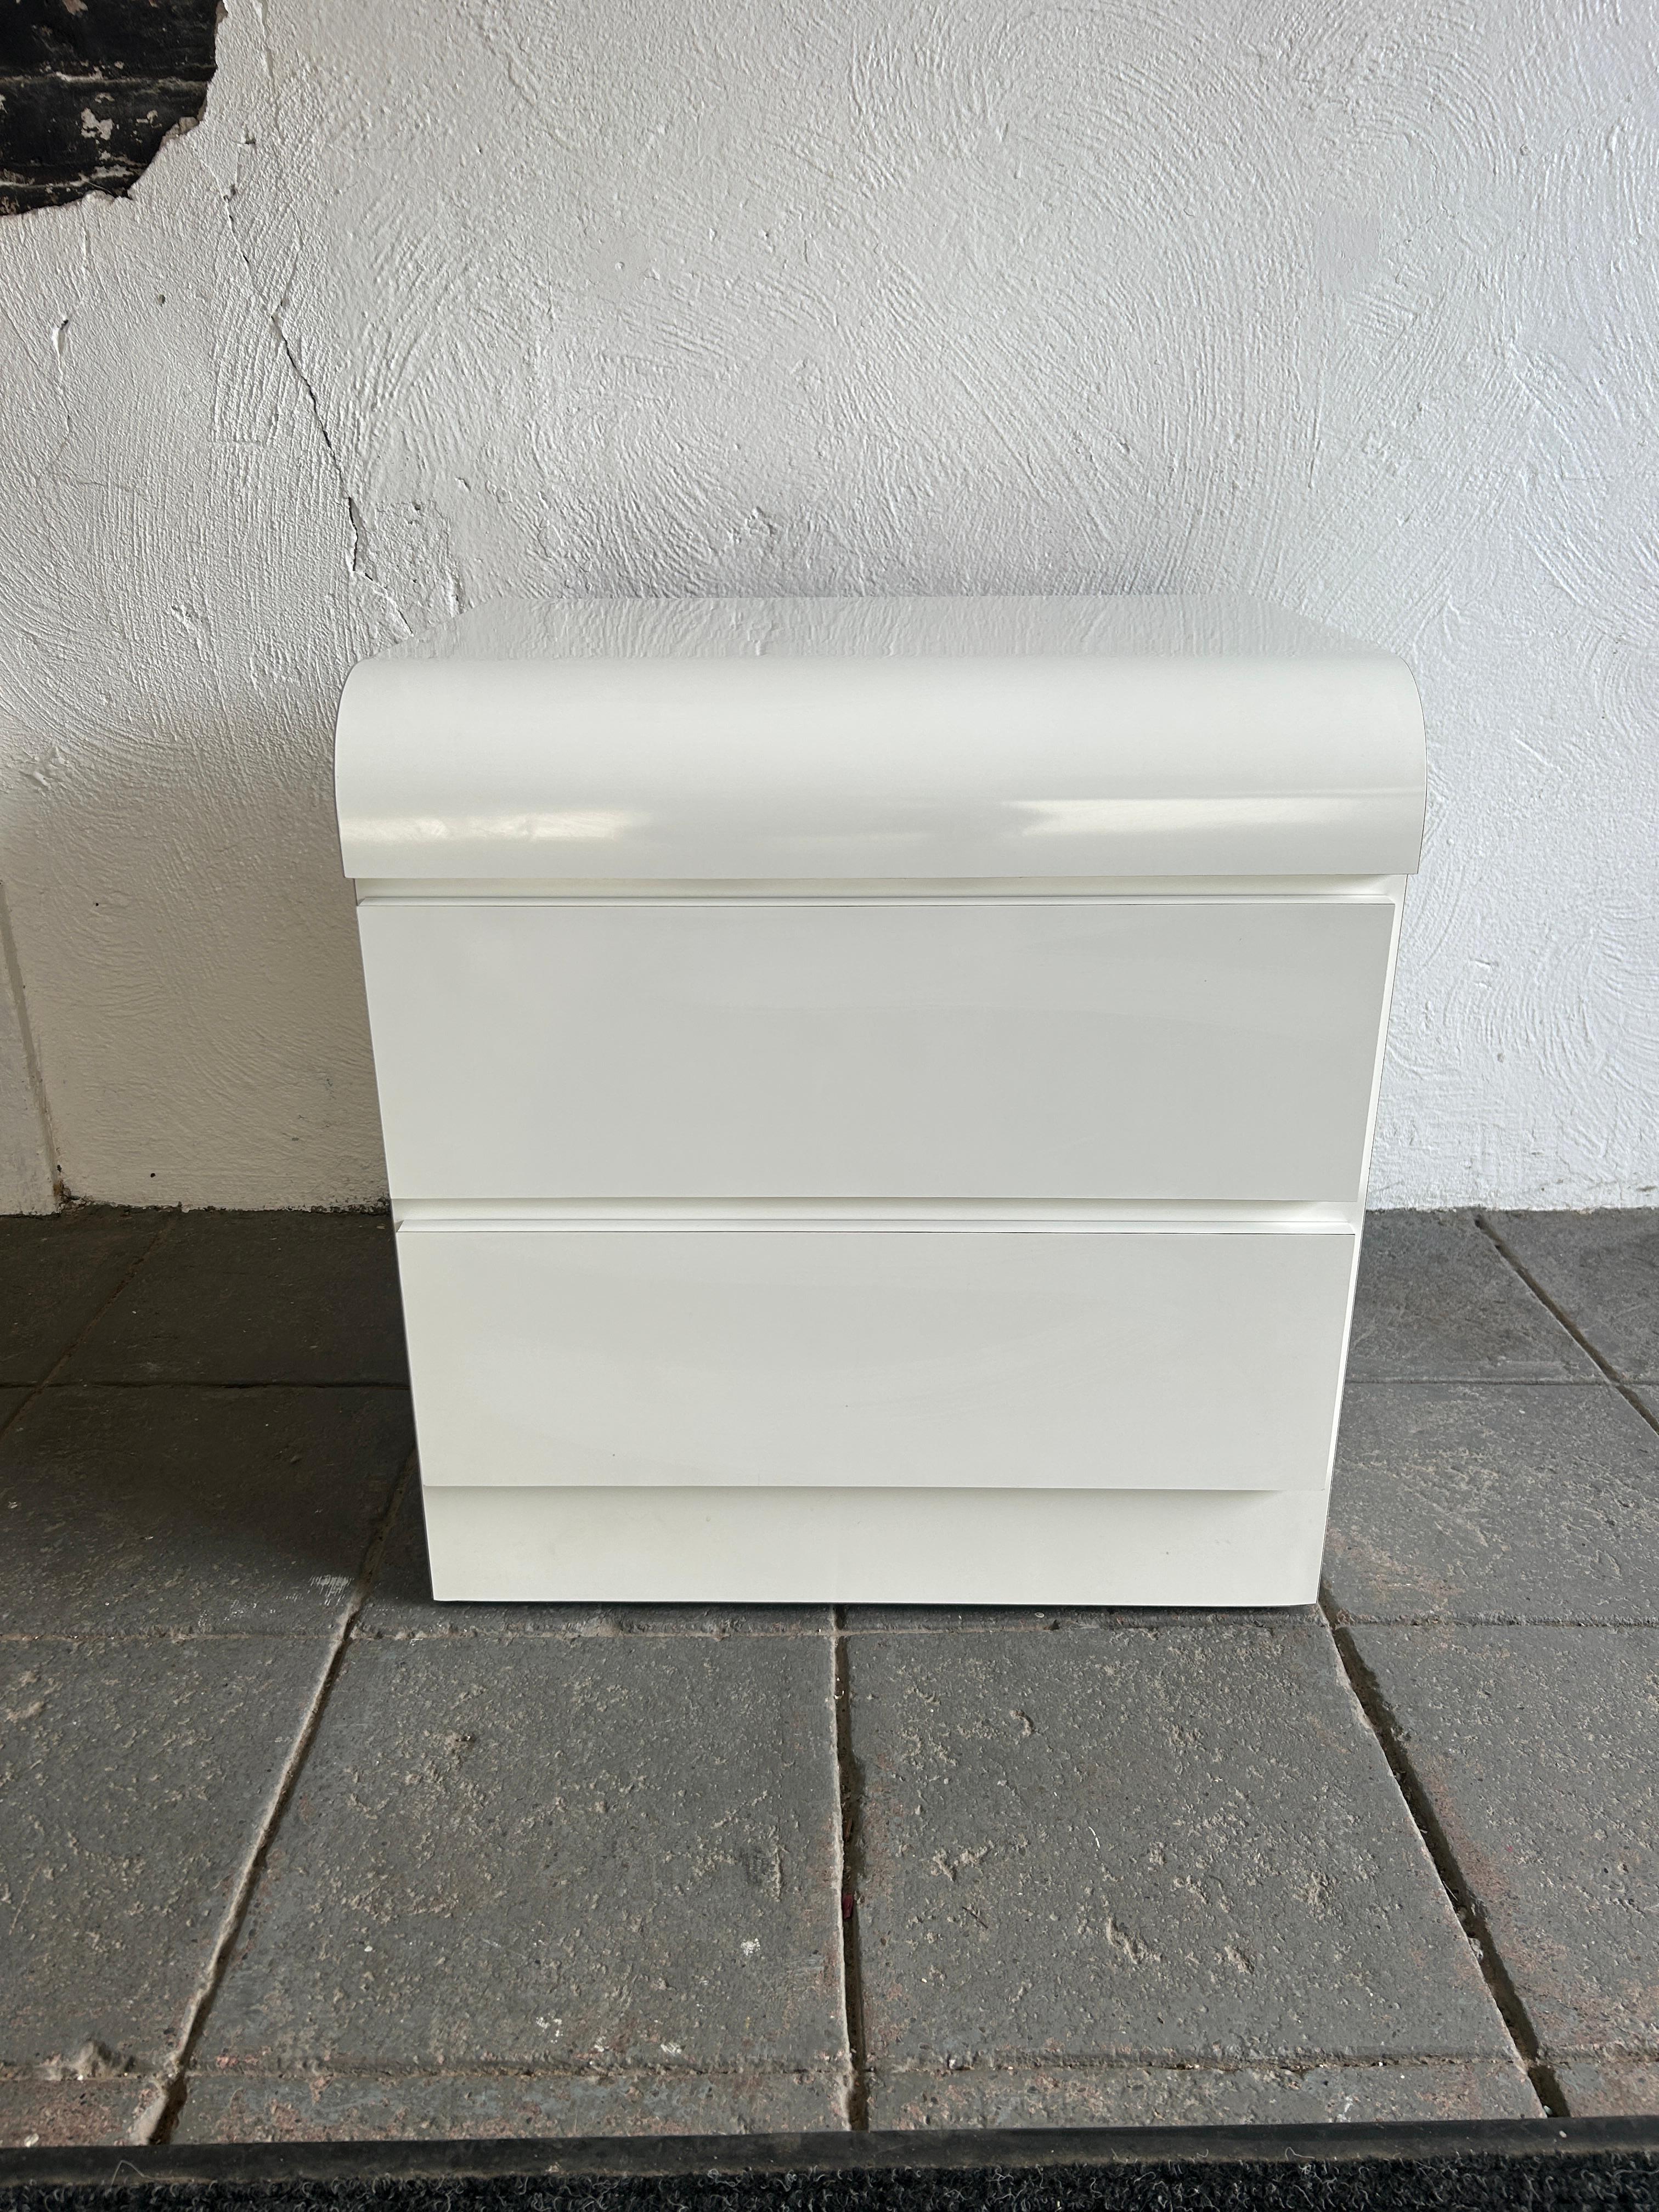 beautiful post modern white gloss laminate waterfall front 2 drawer nightstand, circa 1980. Very clean inside and out almost like new. Look at photos. Both drawers have metal glides with stops. Great for home, office, art studio/gallery or retail